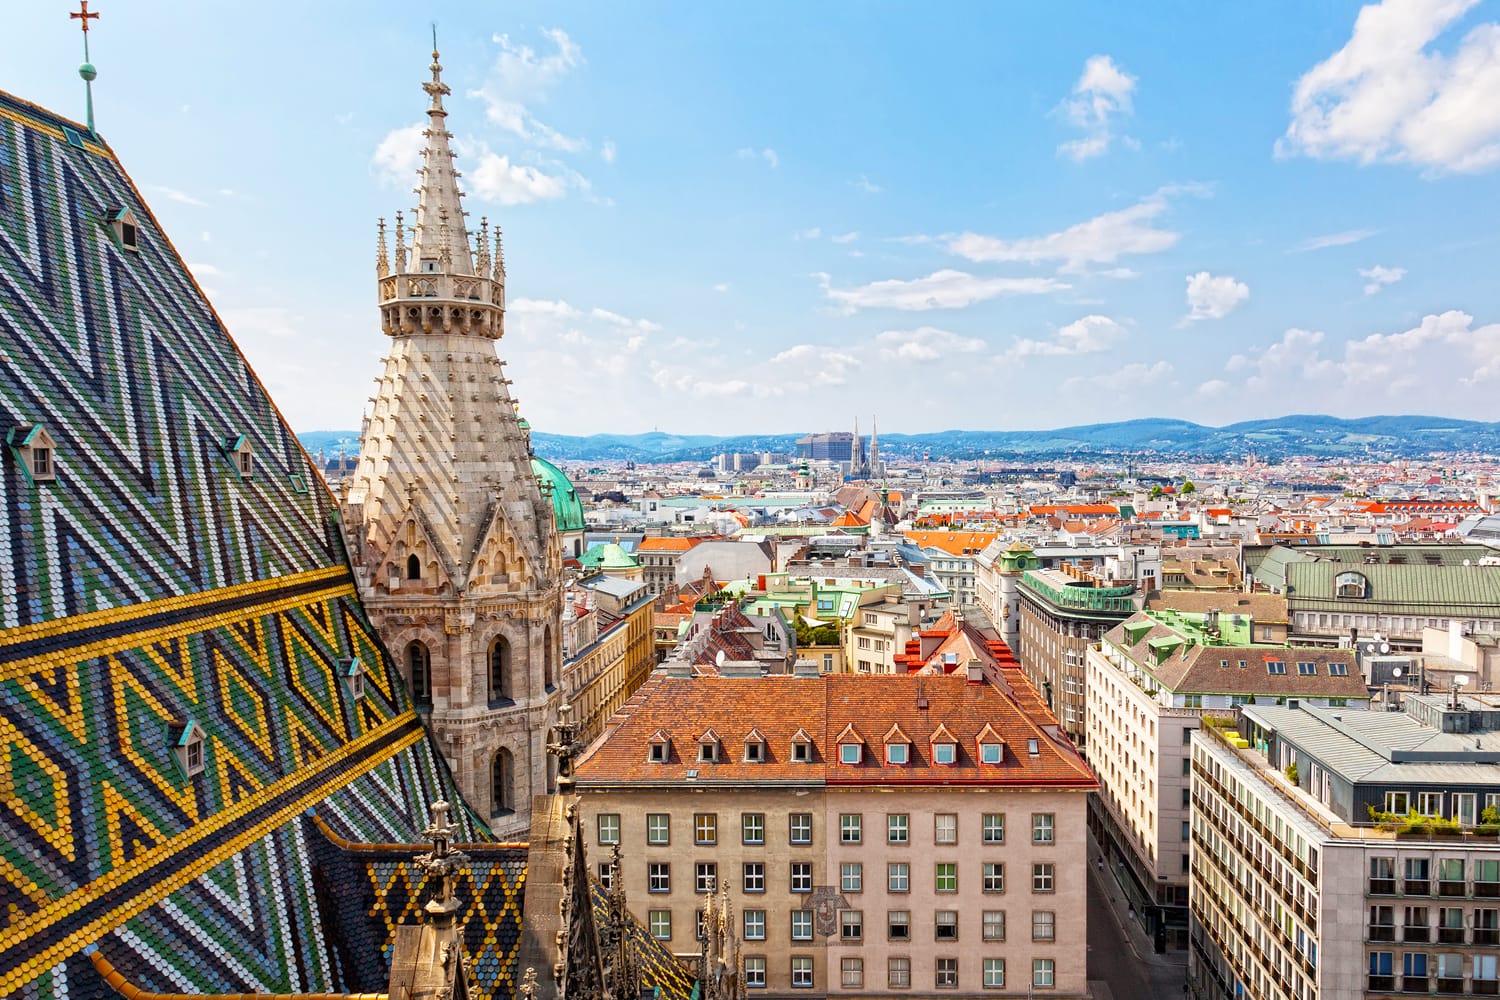 View of Vienna from Saint Stephane's cathedral, Austria